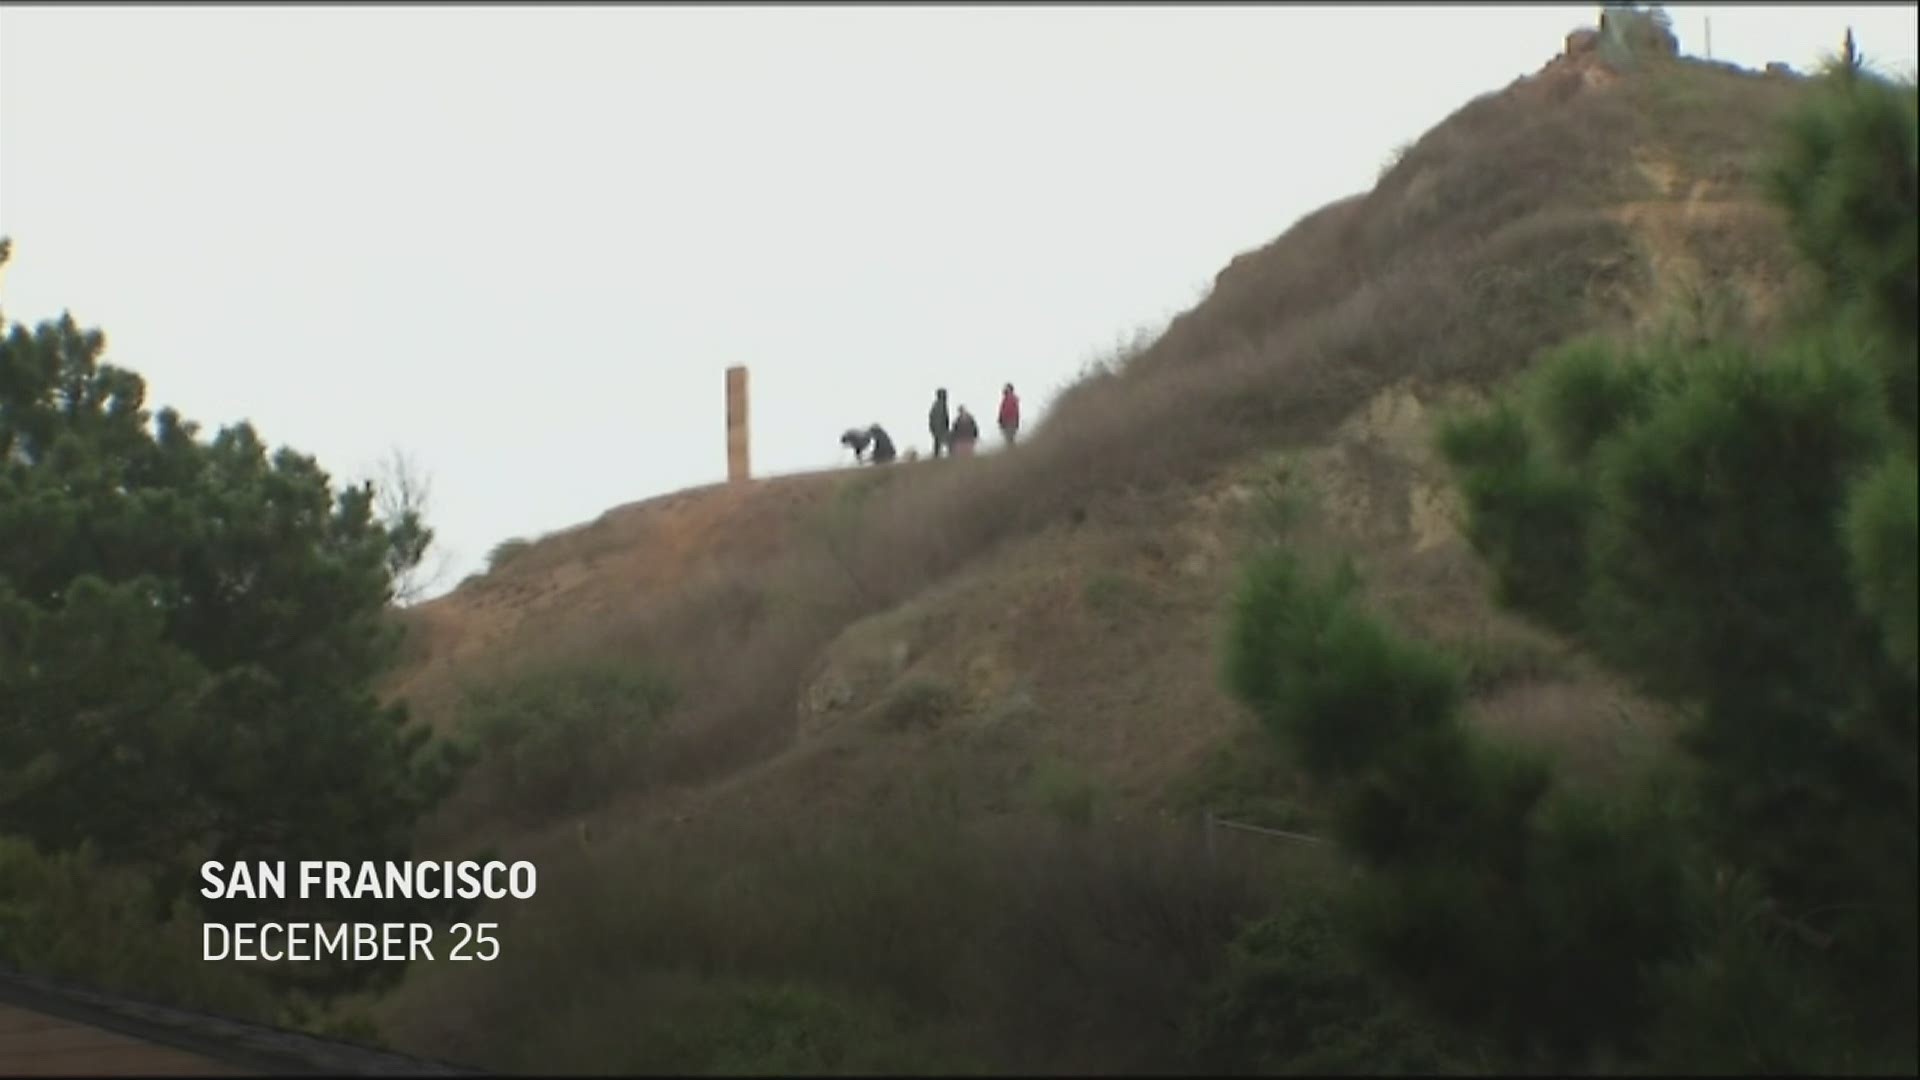 A nearly 7-foot-tall monolith made of gingerbread mysteriously appeared on a San Francisco hilltop on Christmas Day...and collapsed the next day.